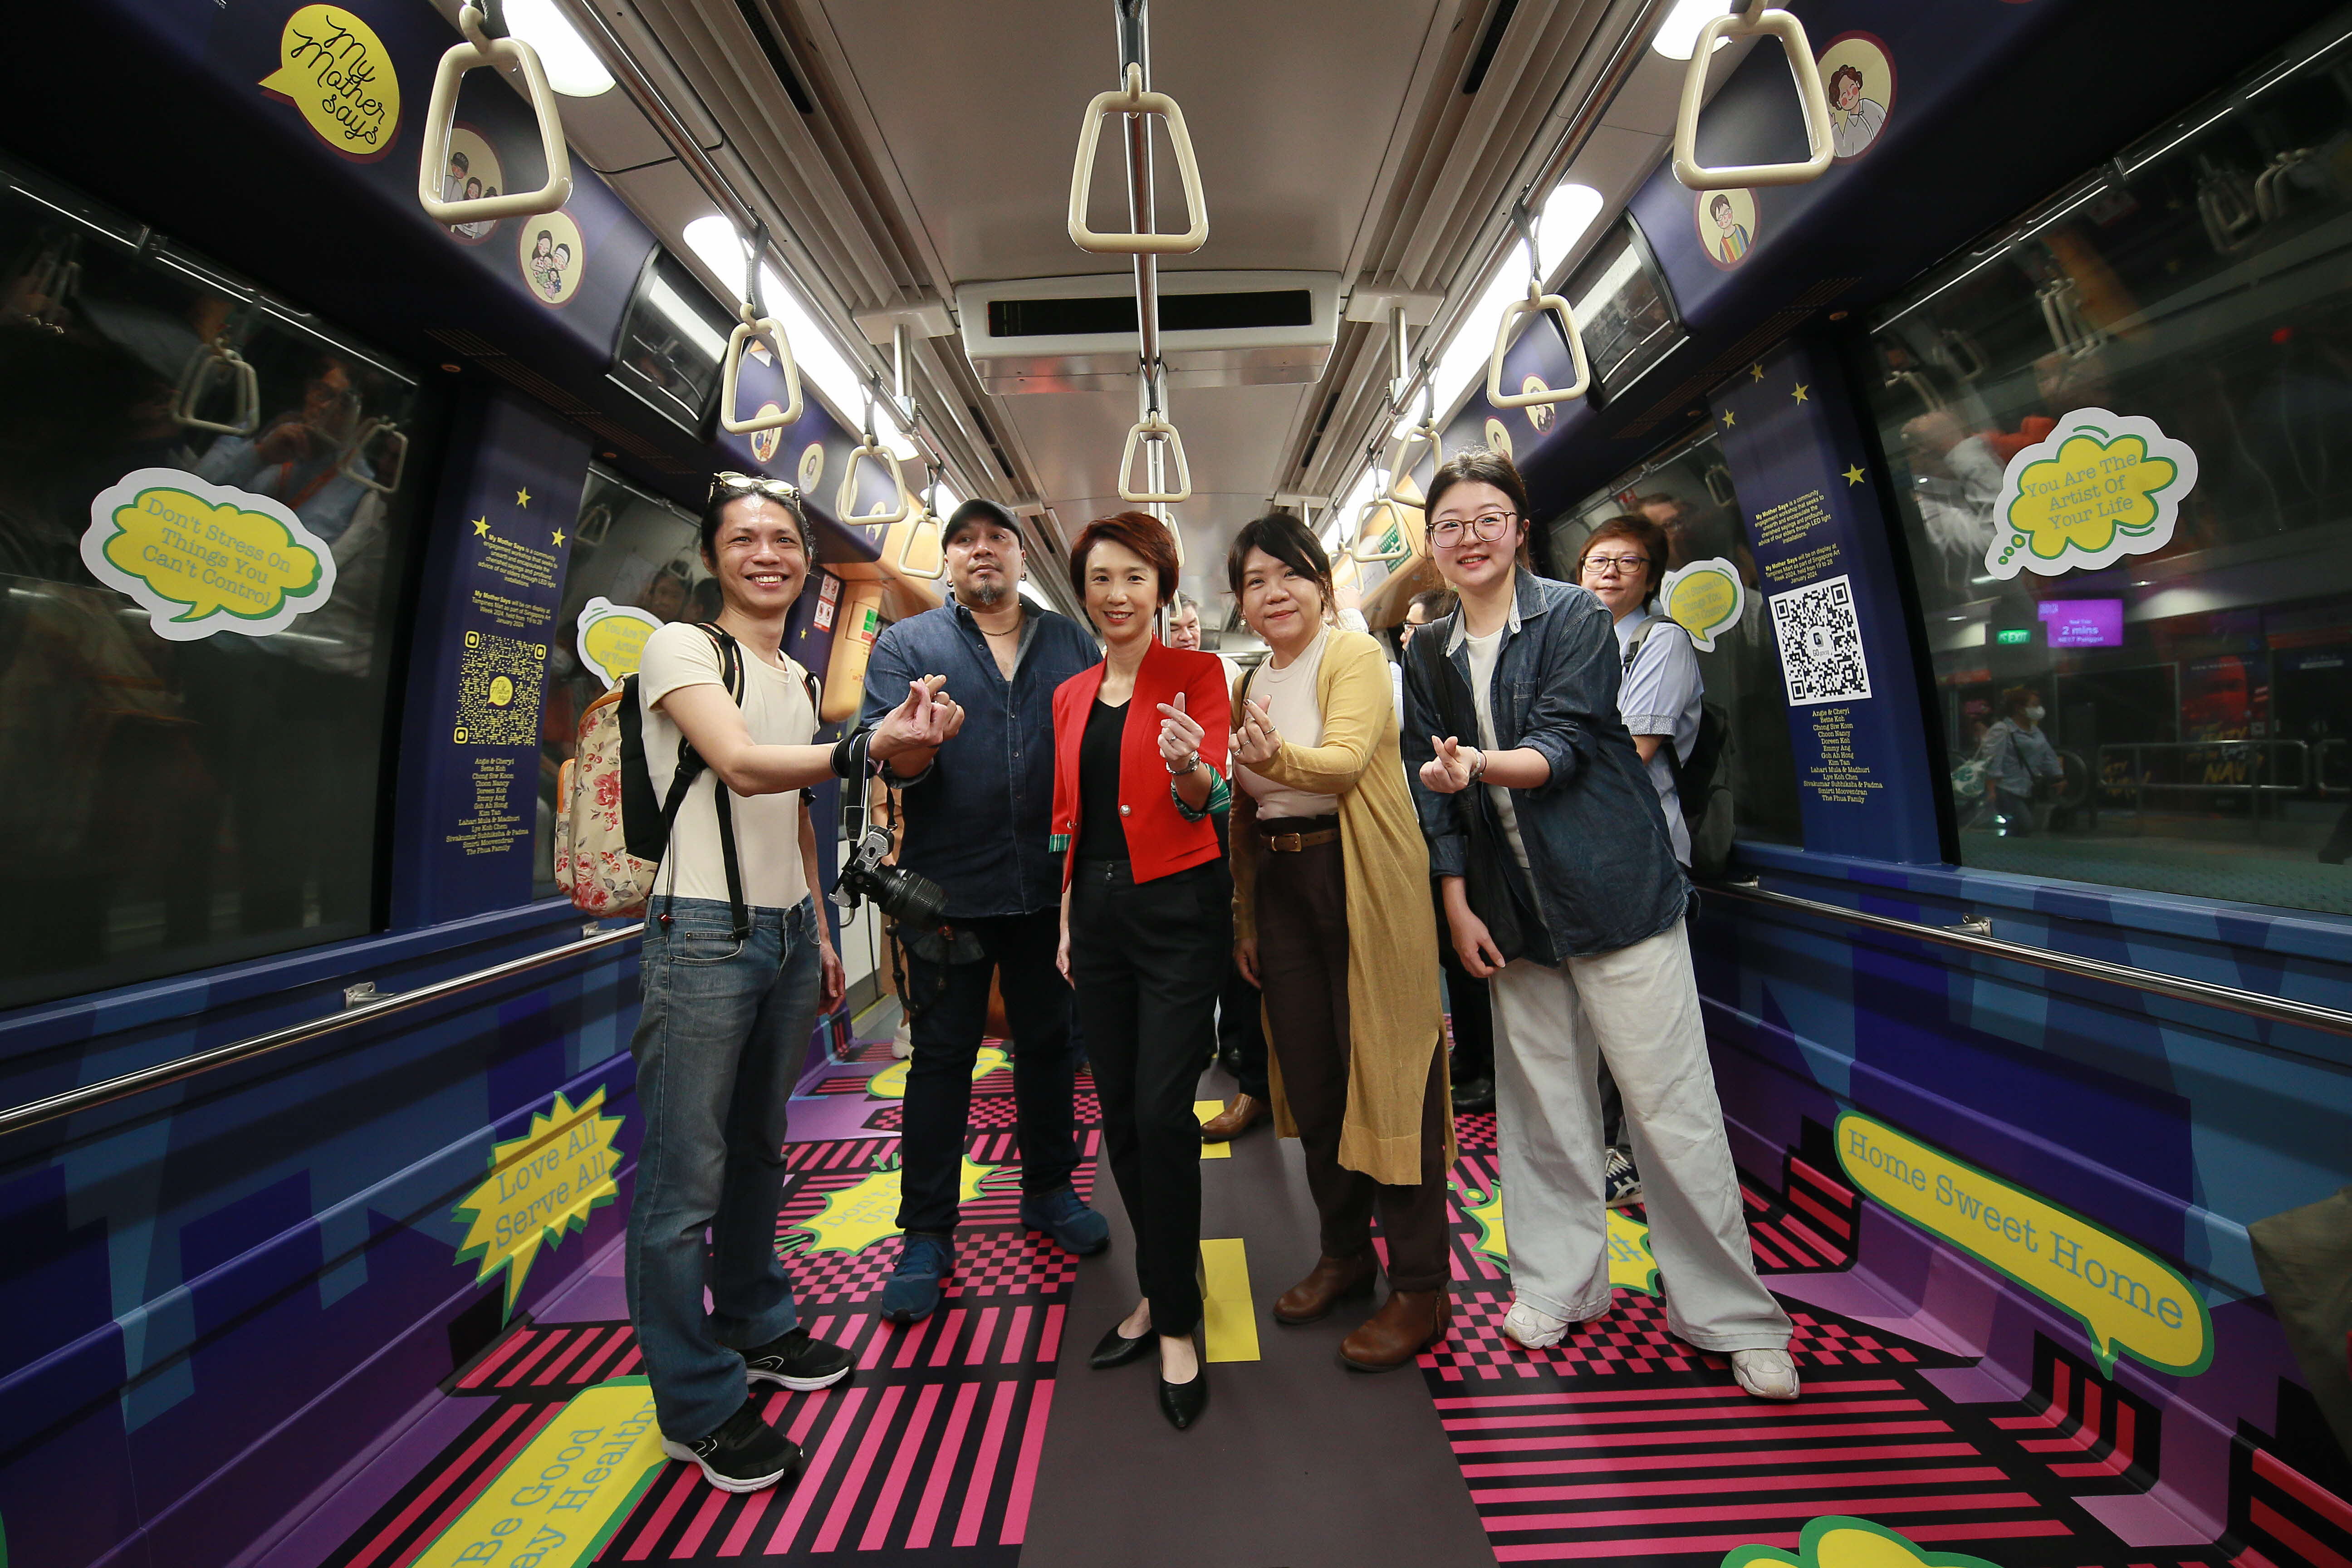 Ms Low Yen Ling, Minister of State, Ministry of Culture, Community and Youth & Ministry of Trade and Industry, with artists behind the  “My Mother Says” art themed train presented by the National Arts Council and the Land Transport Authority.